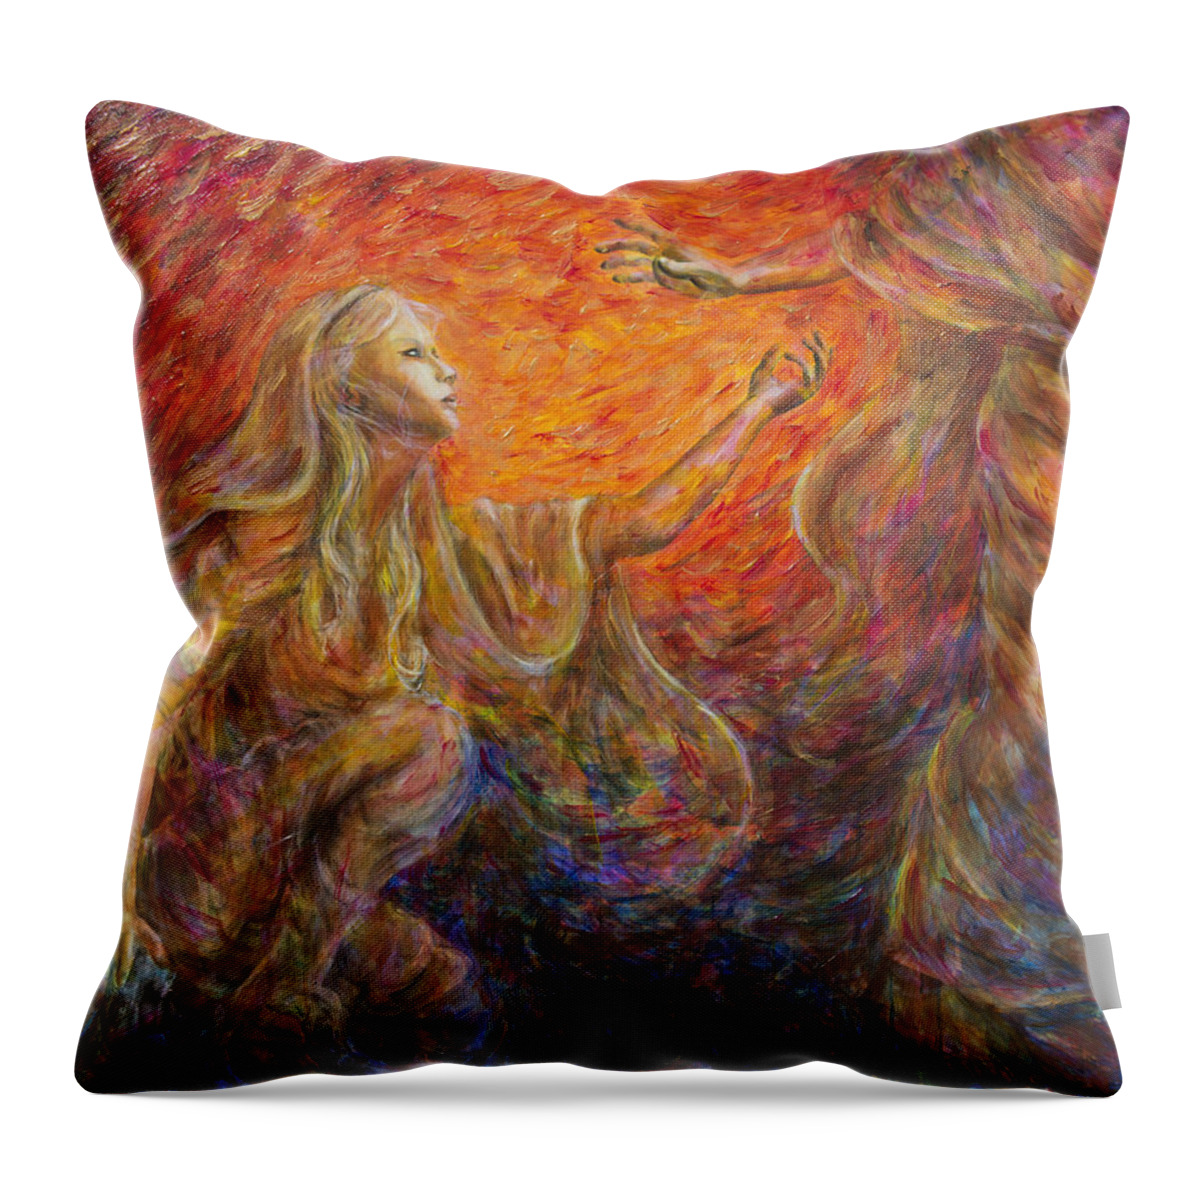 Mary Throw Pillow featuring the painting Noli Me Tangere by Nik Helbig